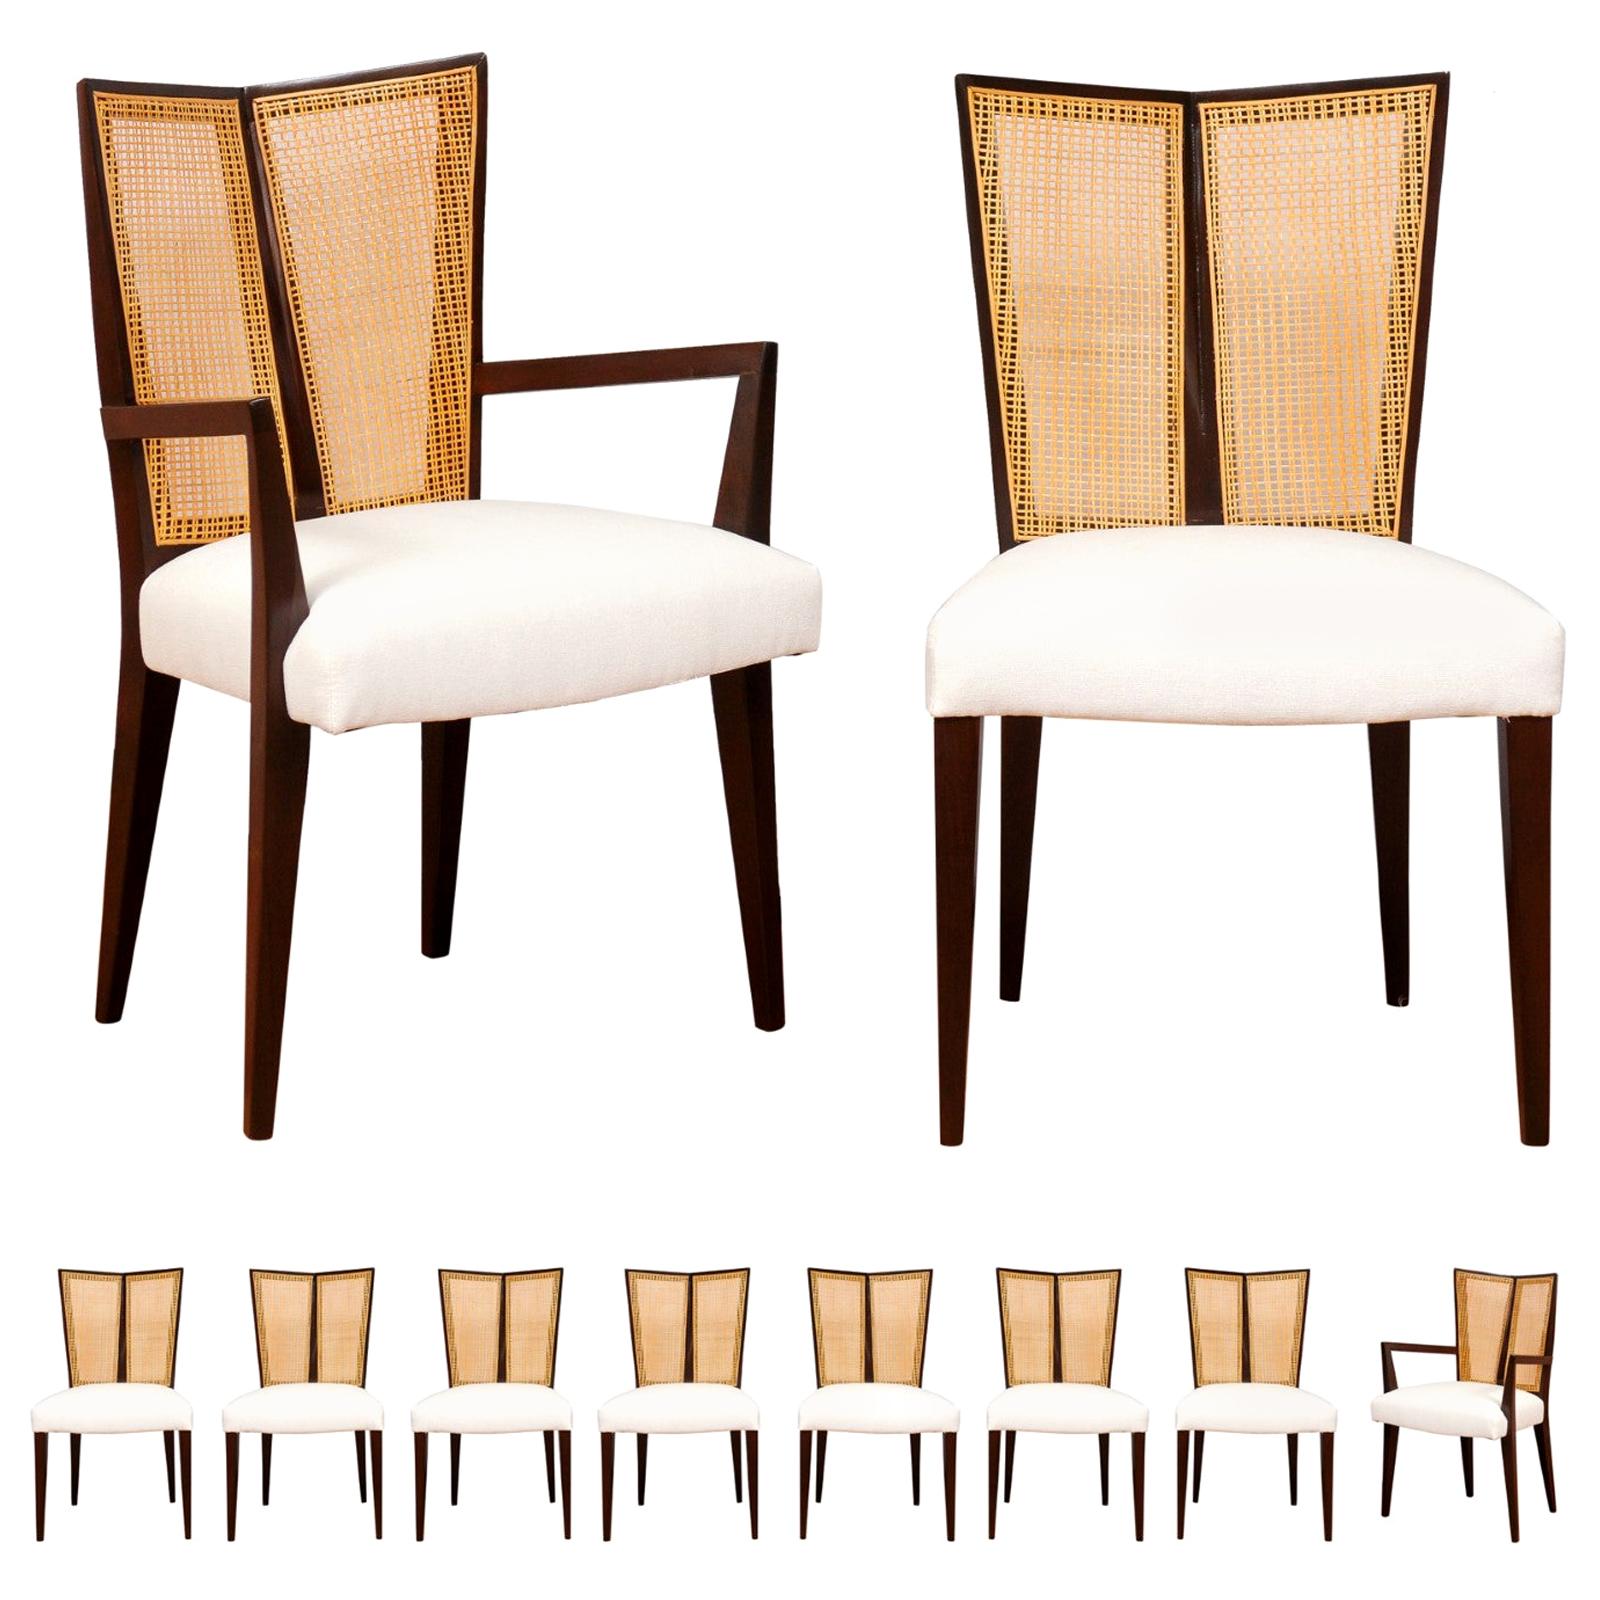 Breathtaking Set of 10 Modern V-Back Cane Chairs by Michael Taylor, circa 1960 For Sale